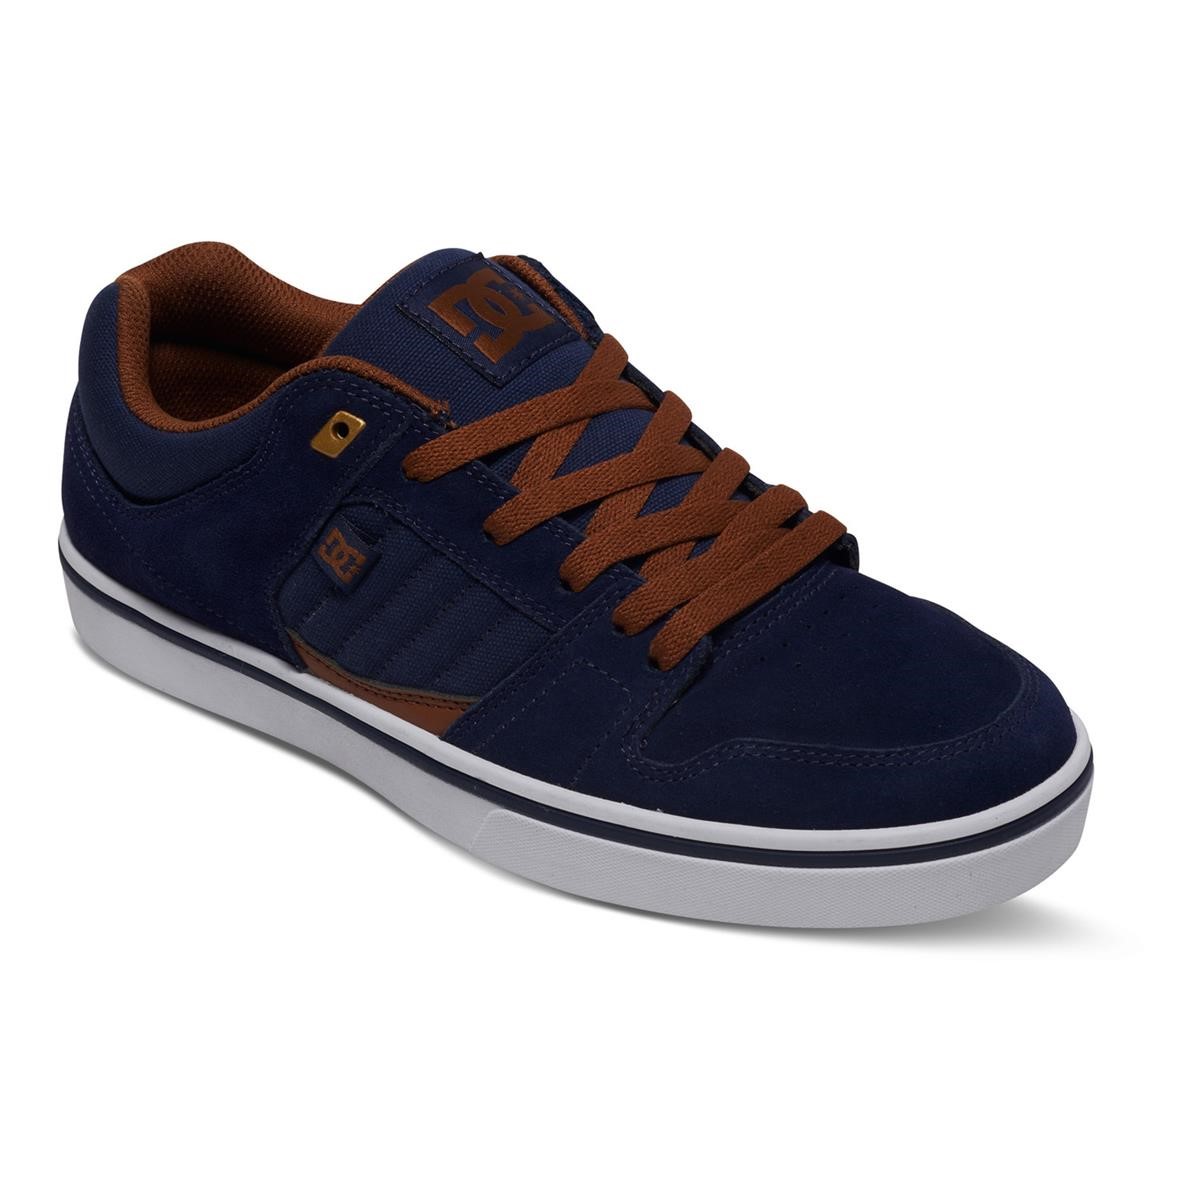 DC Chaussures Course 2 Navy/Camel